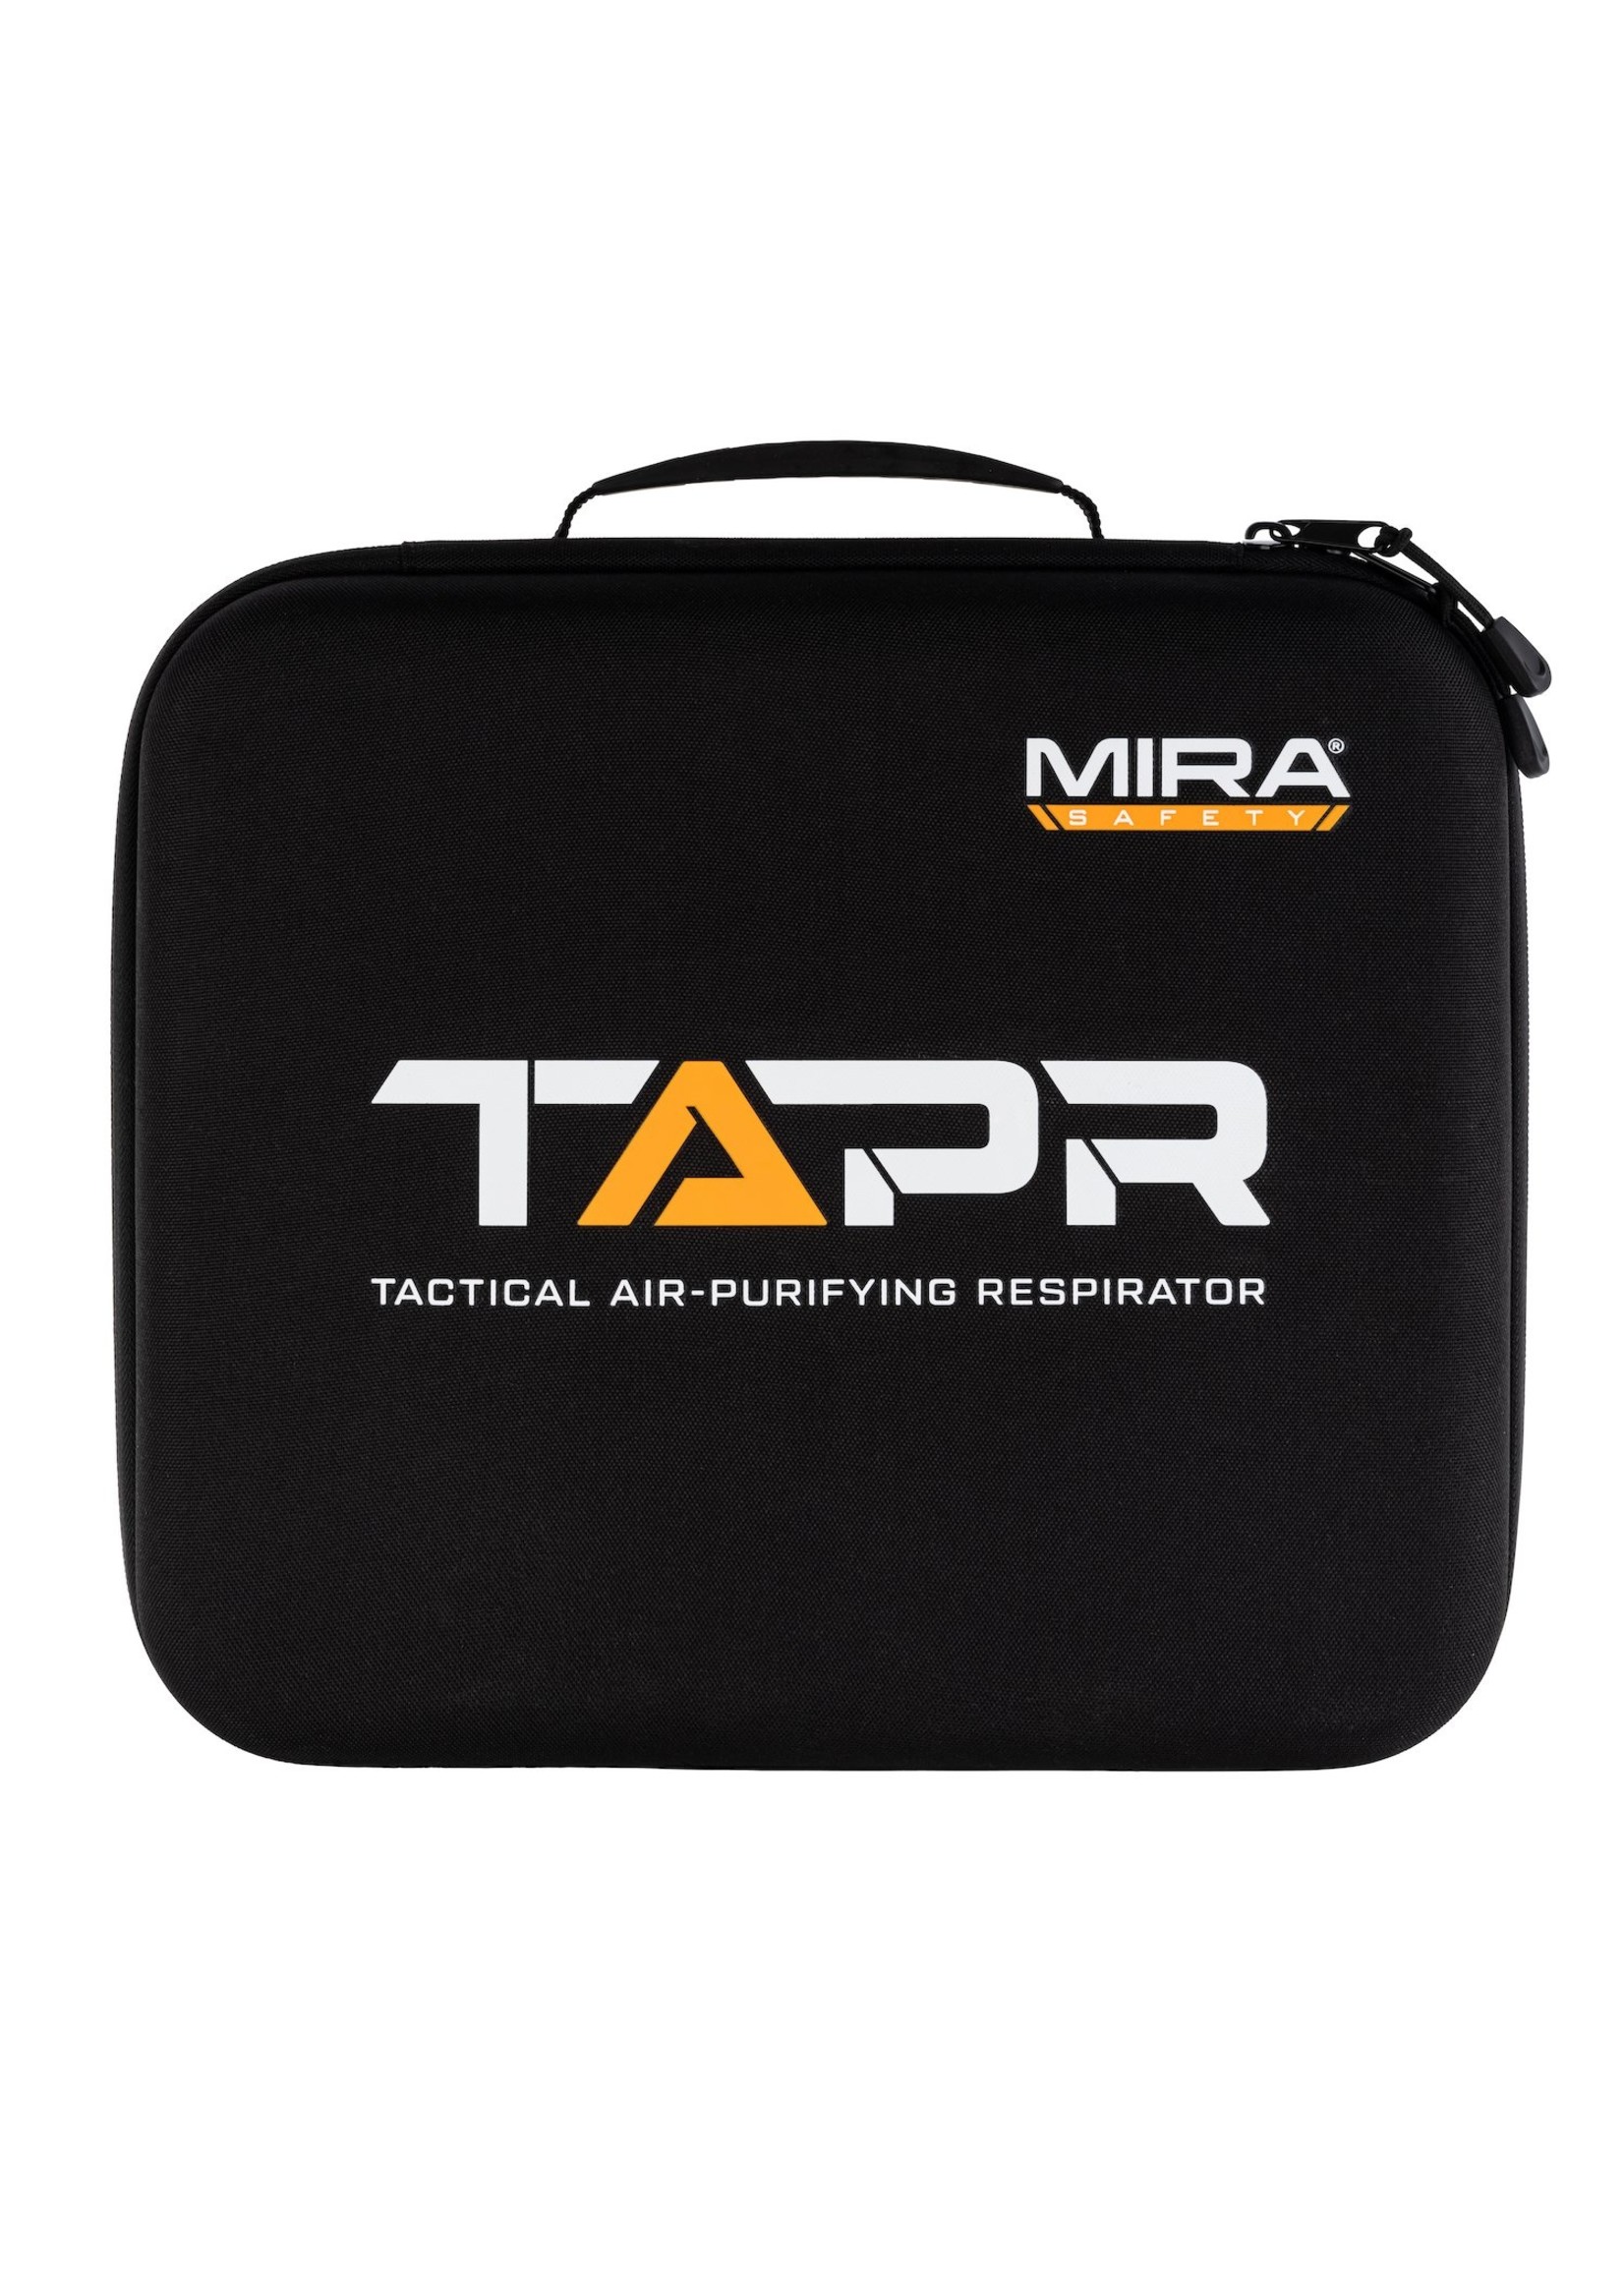 MIRA SAFETY TACTICAL AIR-PURIFYING RESPIRATOR MASK (TAPR)